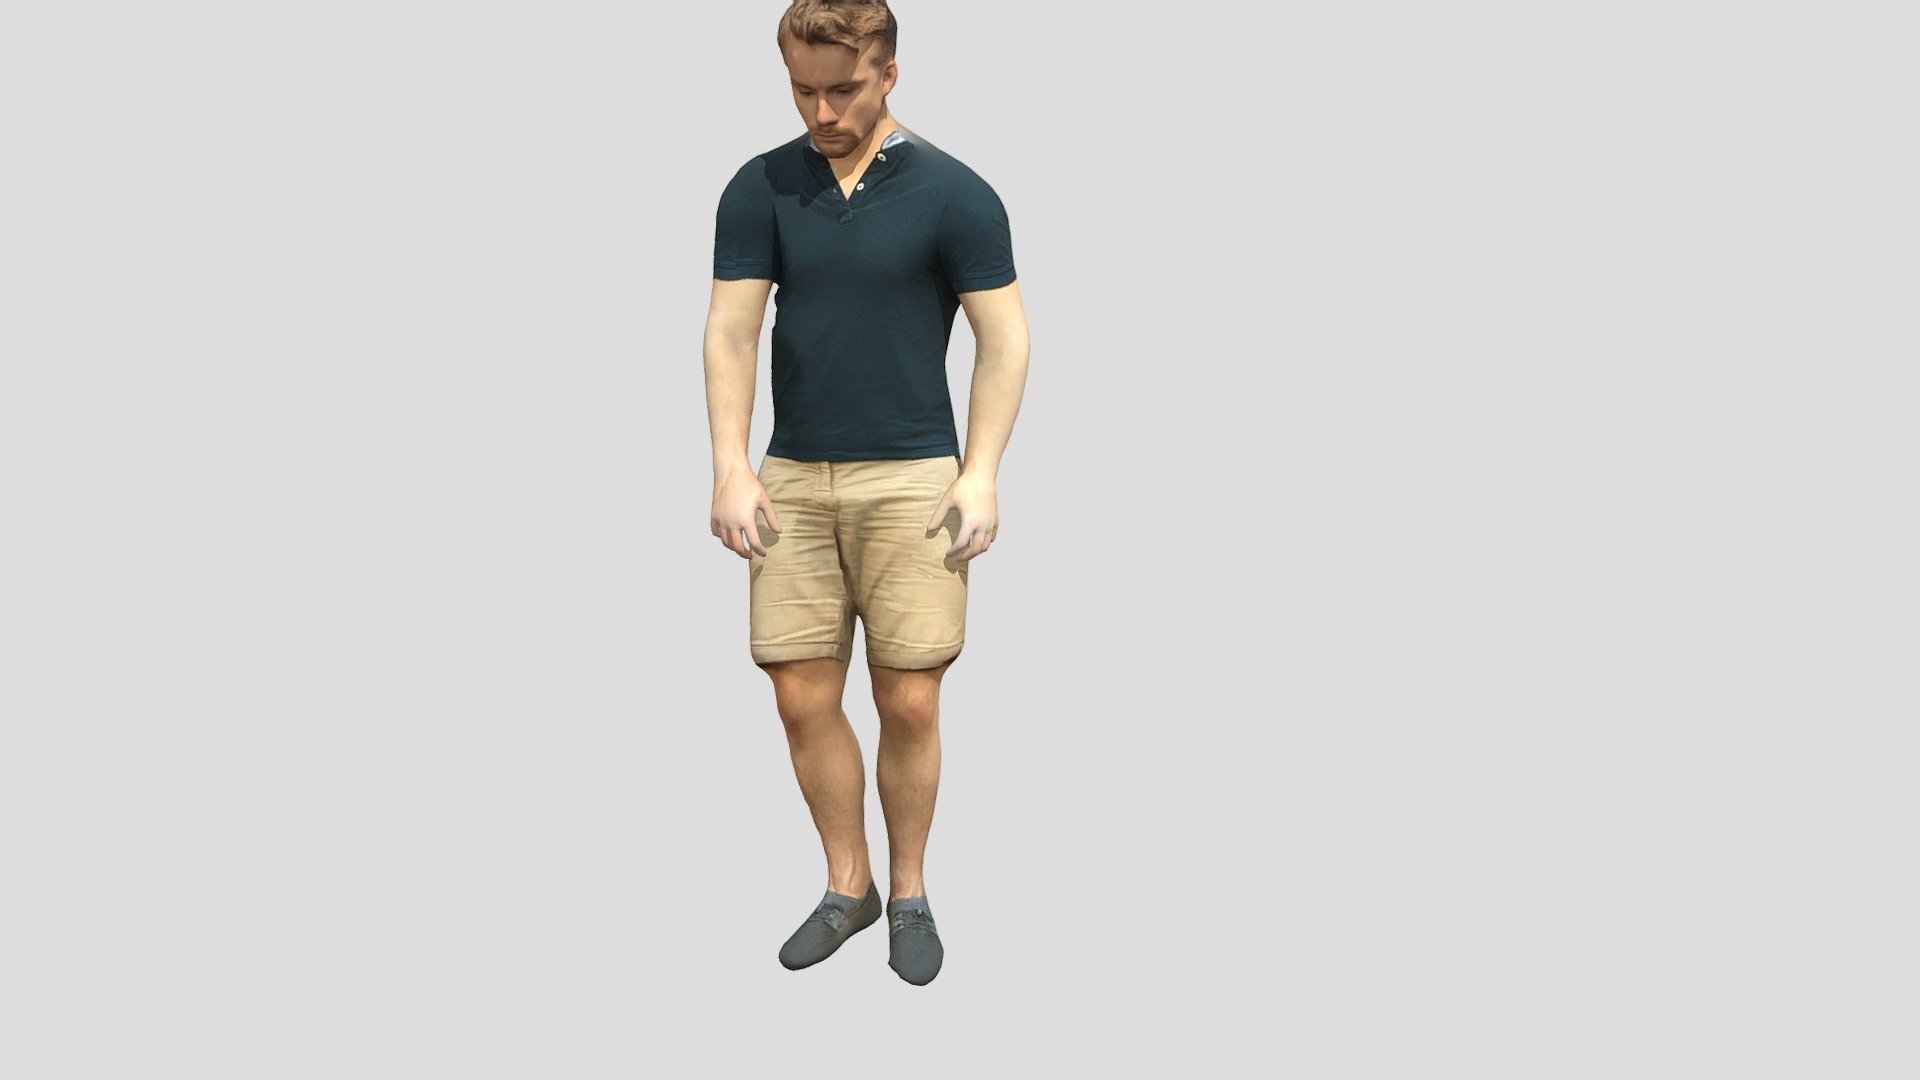 Human 3D model scanned with iPhone X